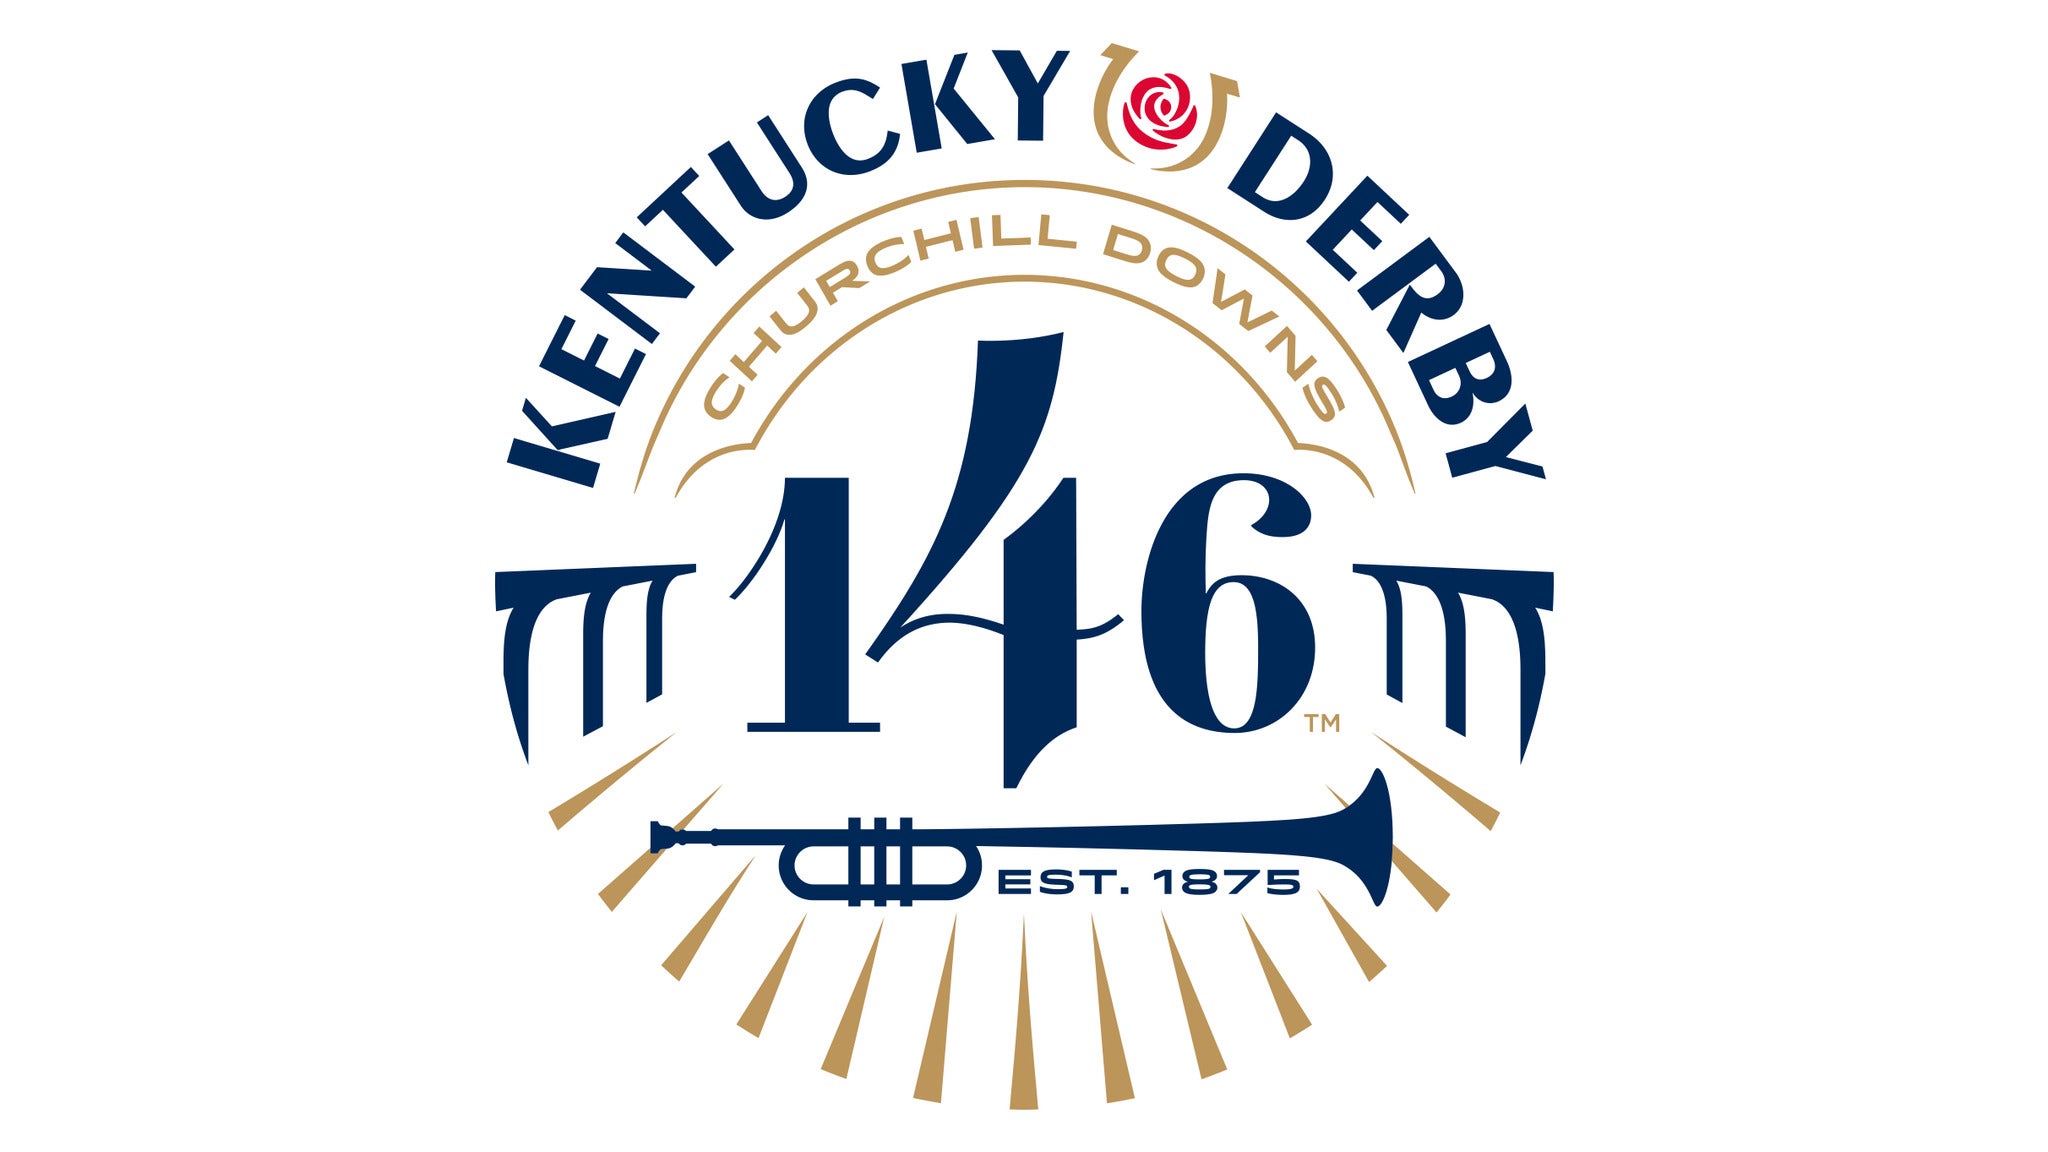 146th Kentucky Derby - Infield & Paddock General Admission Single Day in Louisville promo photo for Discount Purchase Pricing presale offer code